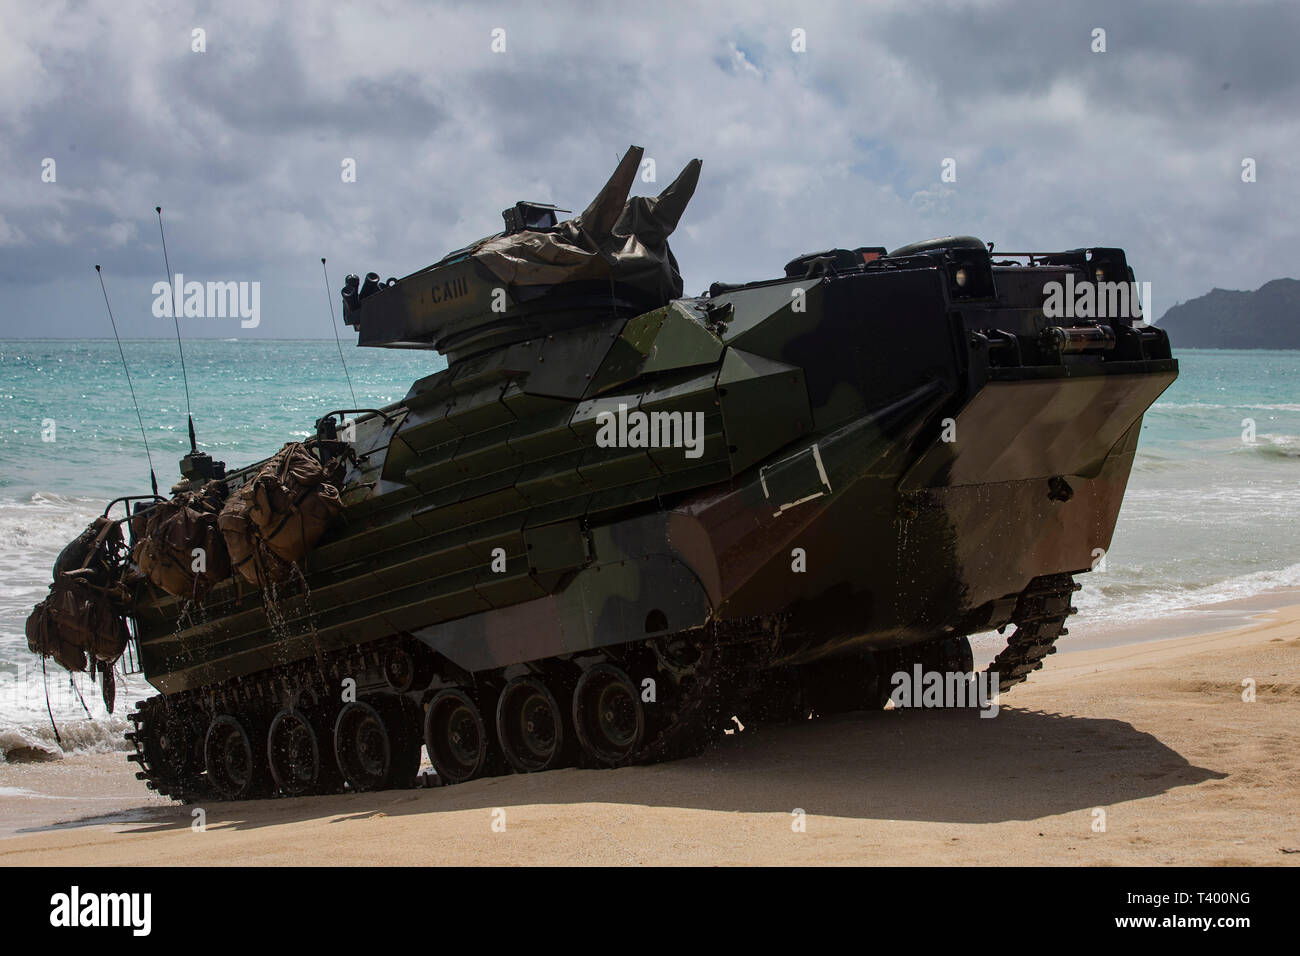 A U.S. Marine Corps amphibious assault vehicle assigned to Combat Assault Company, 3d Marine Regiment, comes ashore during an amphibious assault exercise at Marine Corps Training Area Bellows, Marine Corps Base Hawaii, Apr. 9, 2019. The unit conducted a simulated beach assault to improve their lethality and cooperation, as a mechanized unit and force in readiness. (U.S. Marine Corps photo by Sgt. Alex Kouns) Stock Photo